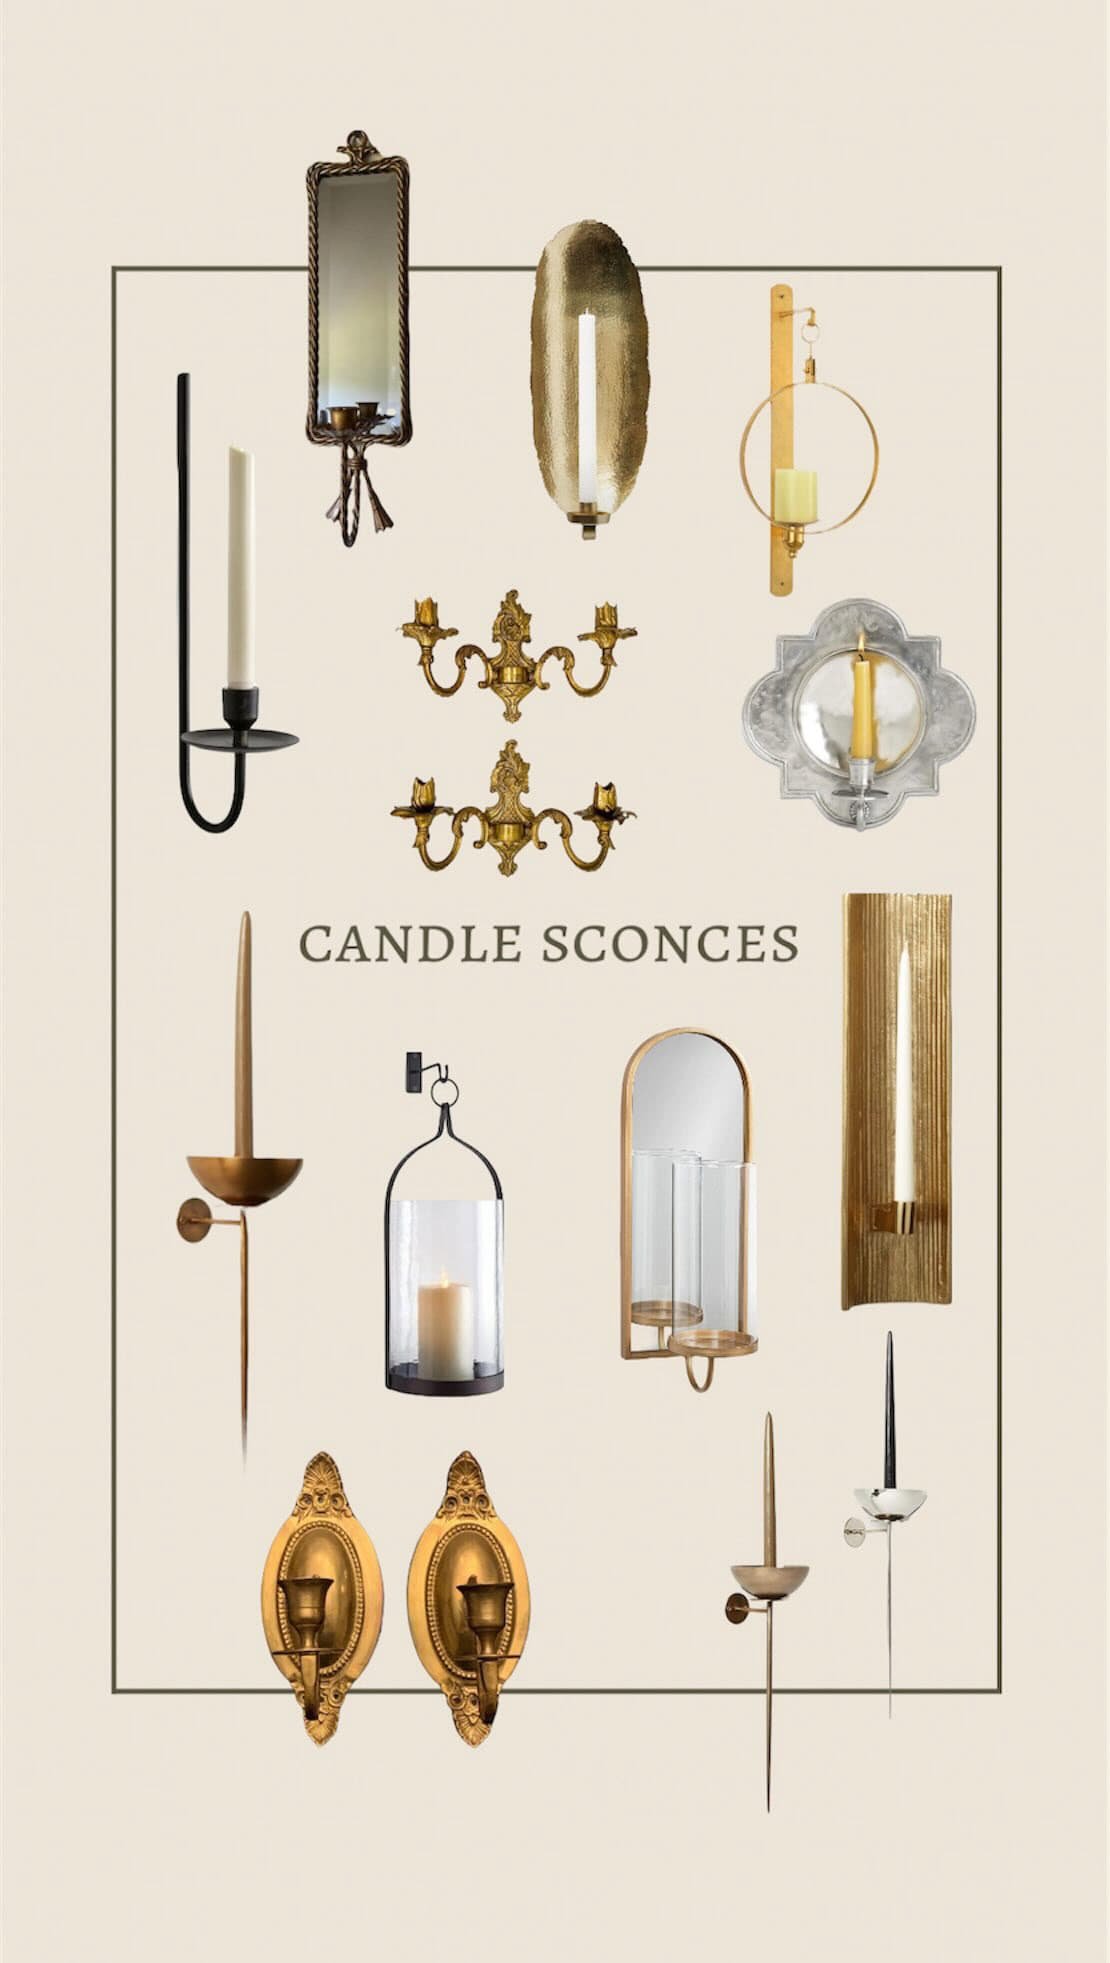 Trending: Candle Sconces